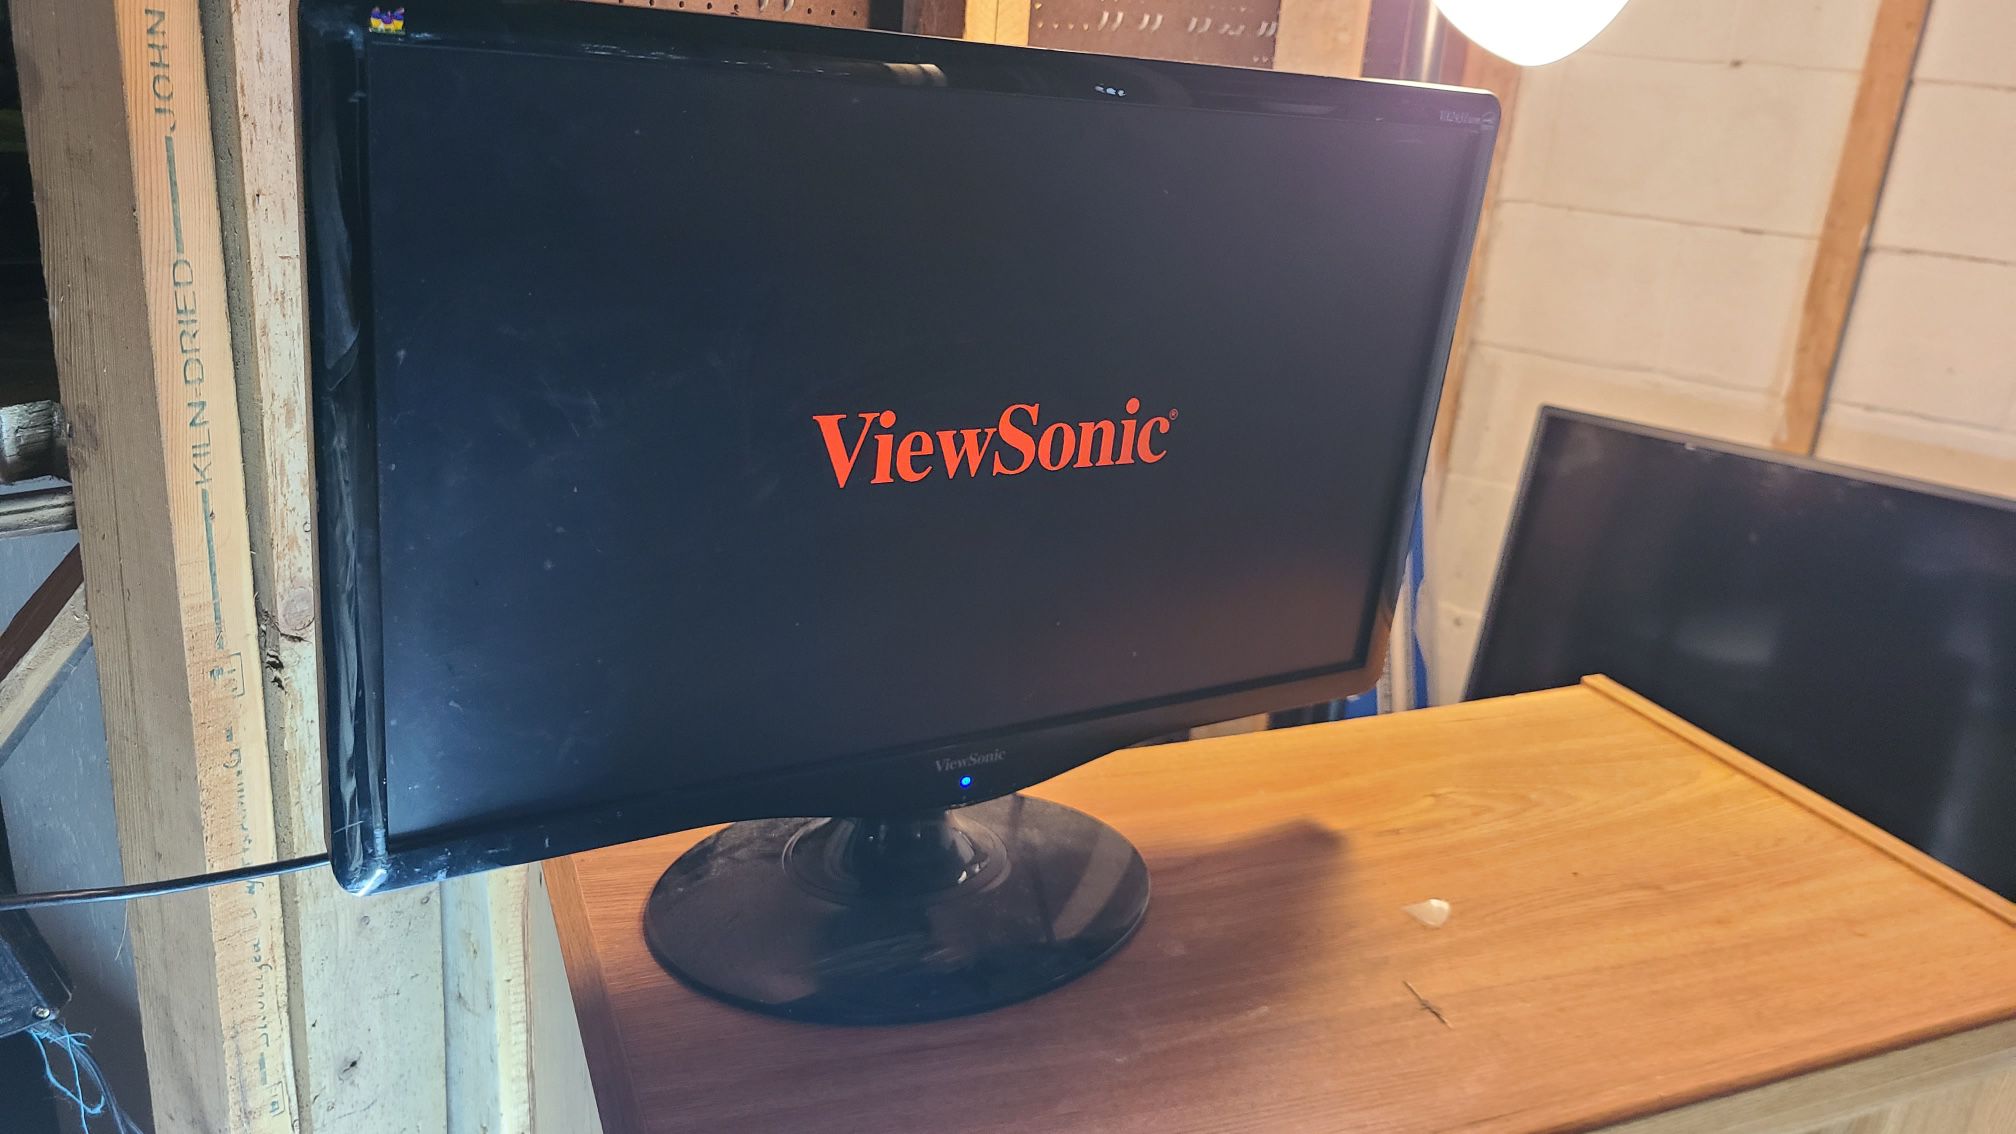 24 Inch view sonic monitor 